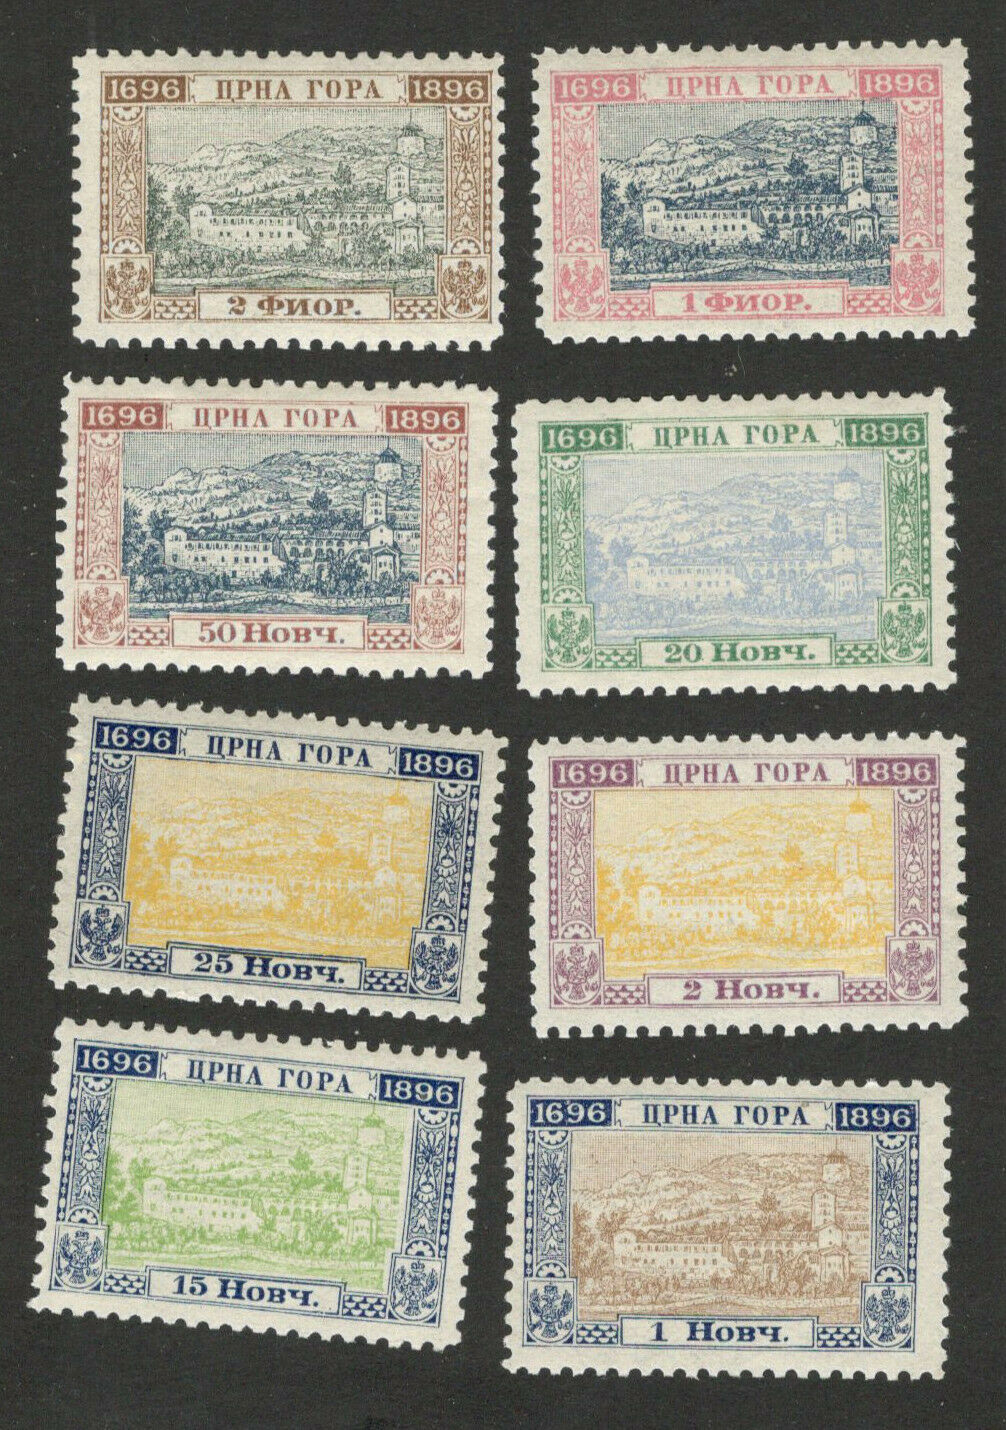 Montenegro - 8 Mh Stamps - Perf. 10 1/2  -1897.   (35)